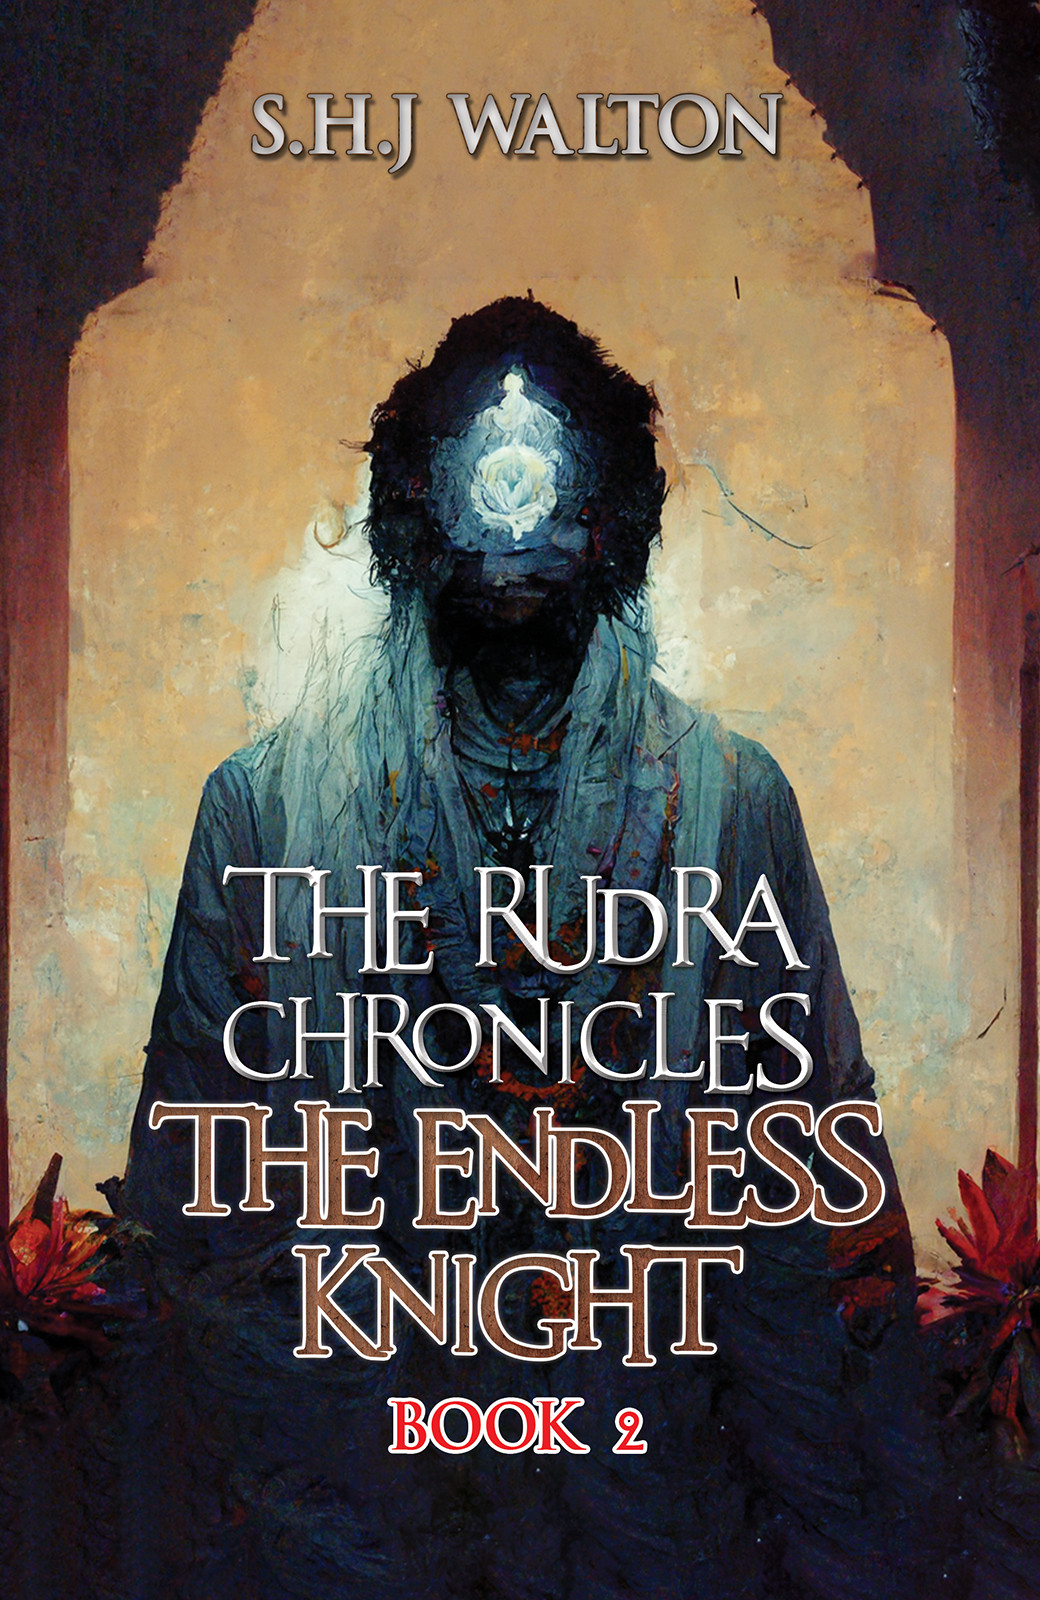 The Rudra Chronicles: The Endless Knight